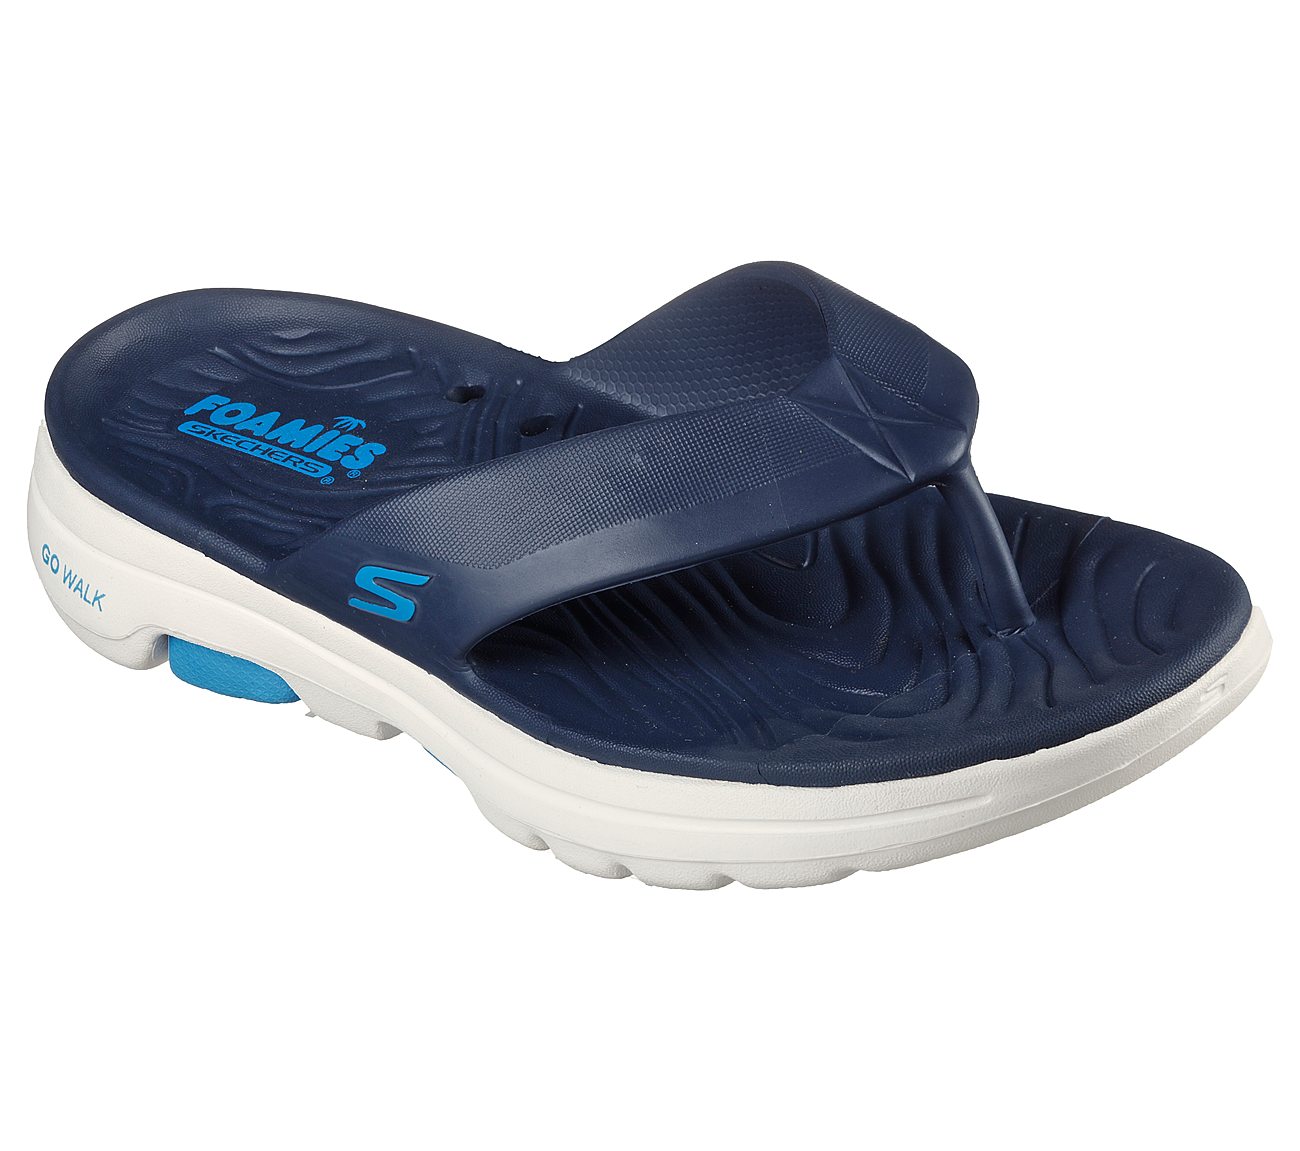 GO WALK 5 - SIT BACK,  Footwear Lateral View